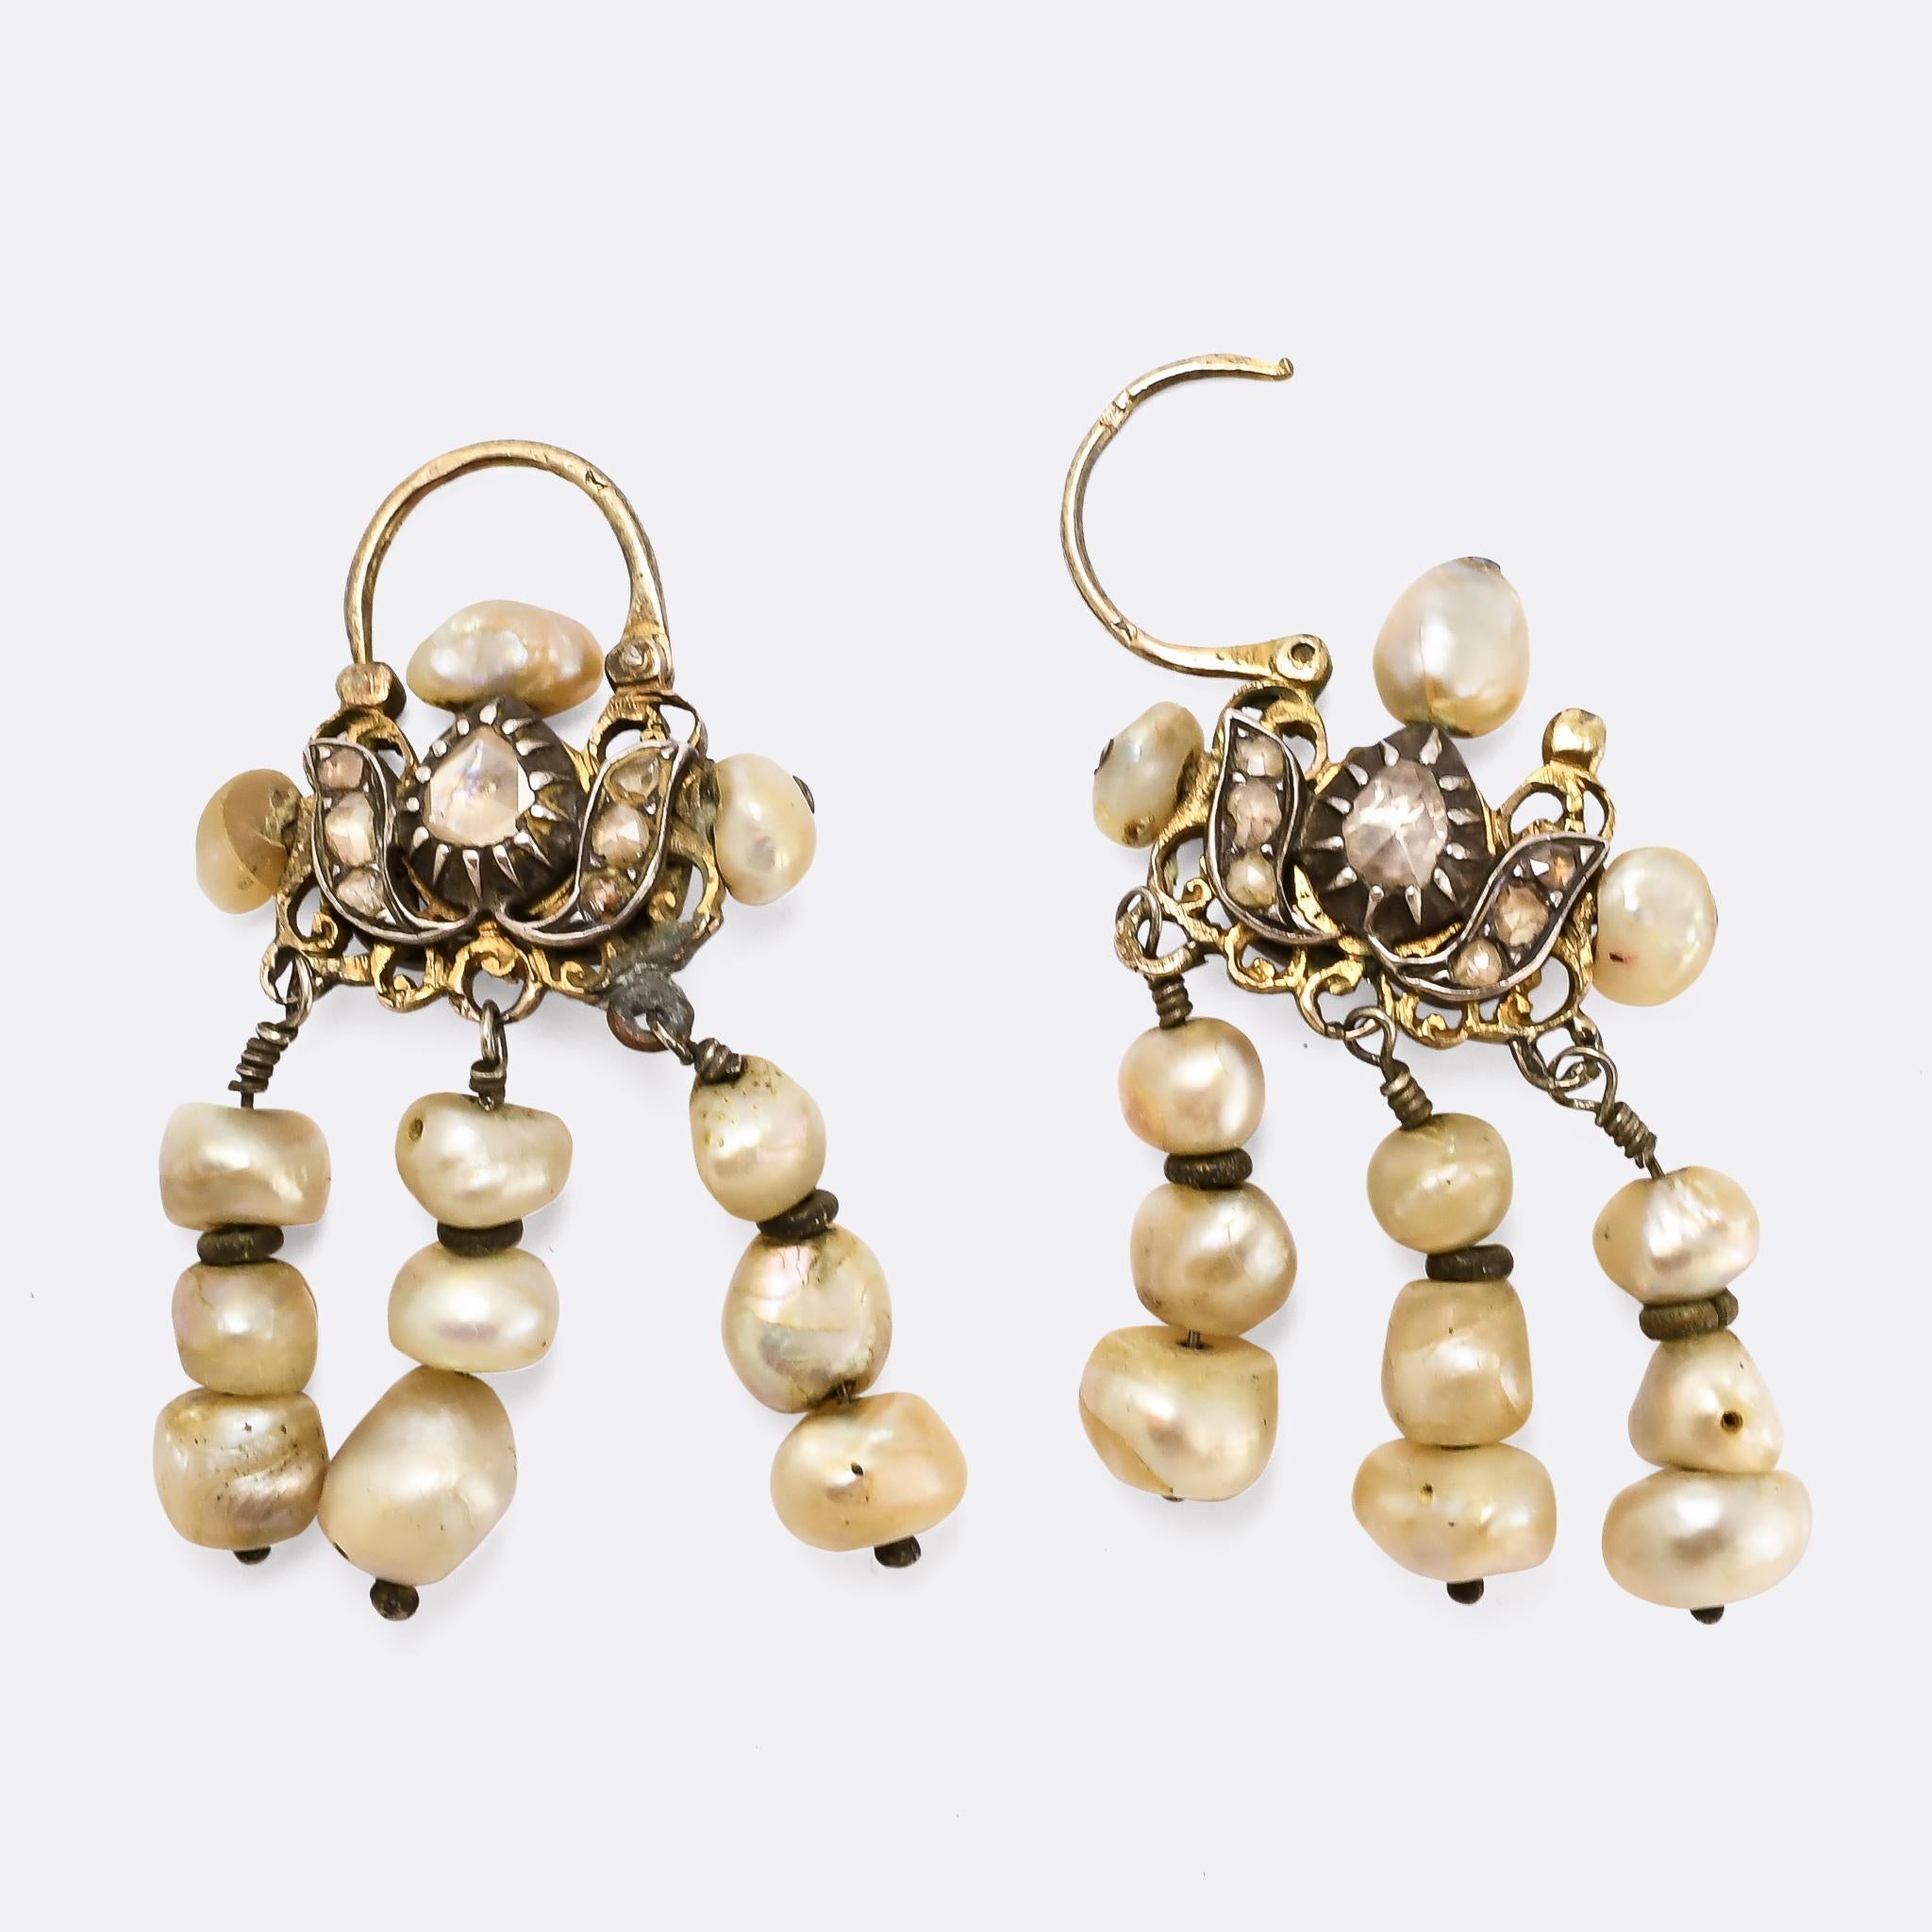 Victorian Antique 19th Century Maghreb Diamond Pearl Earrings For Sale